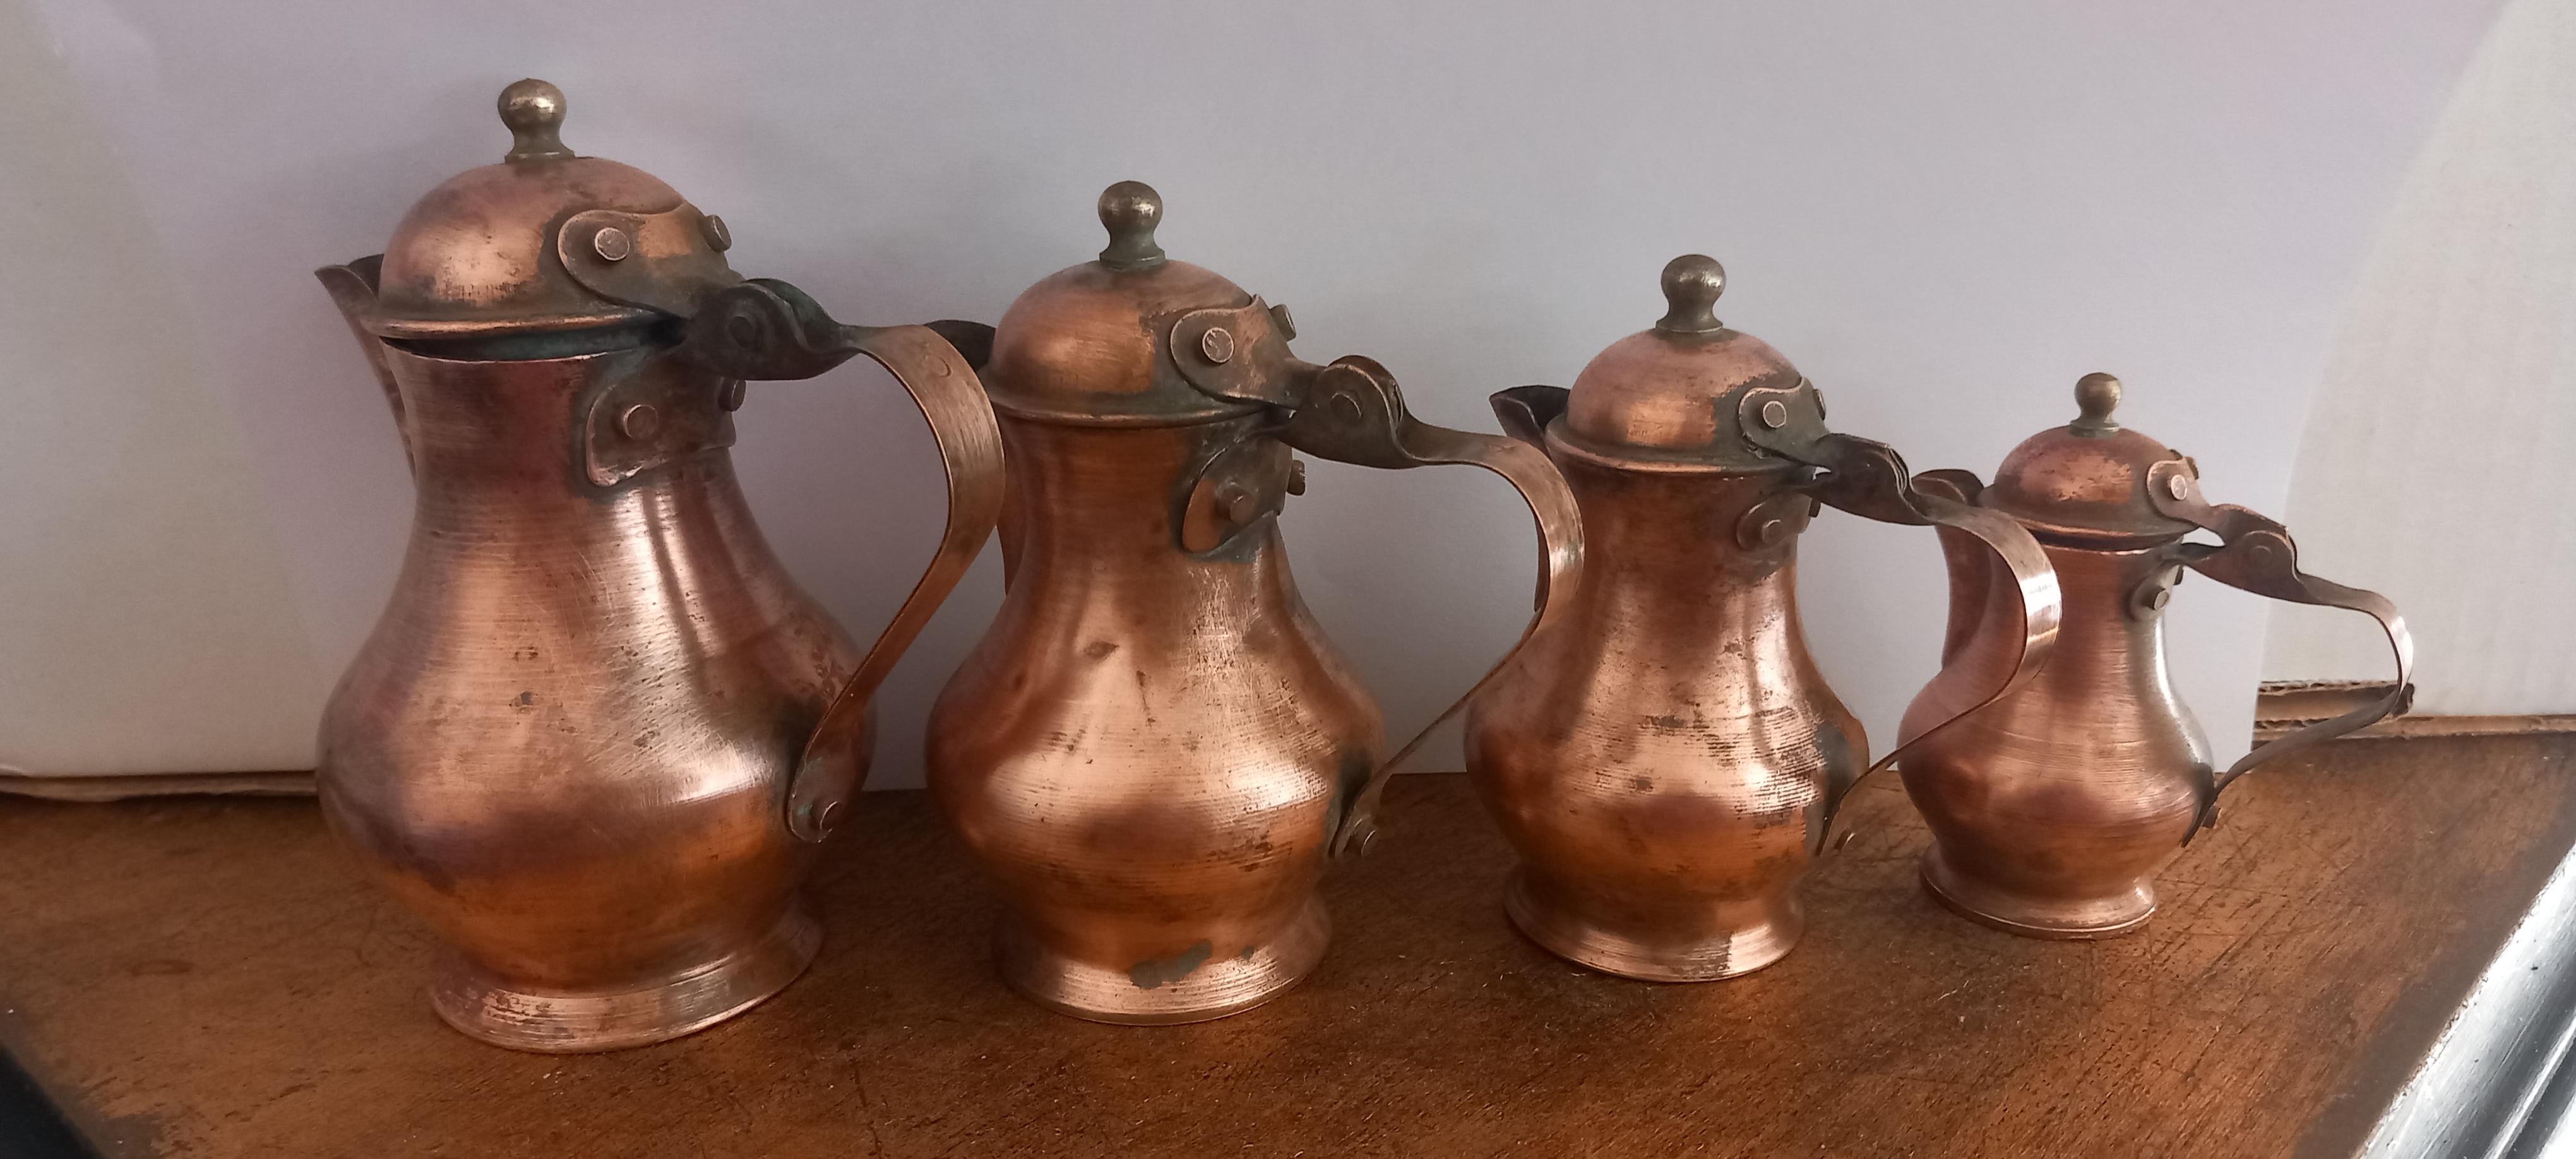 Lot of 4 antique copper coffee pots for rustic kitchen decoration , Smalls
vintage rustic style copper kitchen decoration
They are very decorative pieces. They come from Tuscany, Italy and will give your kitchen a very special touch.
12cm ,10cm,